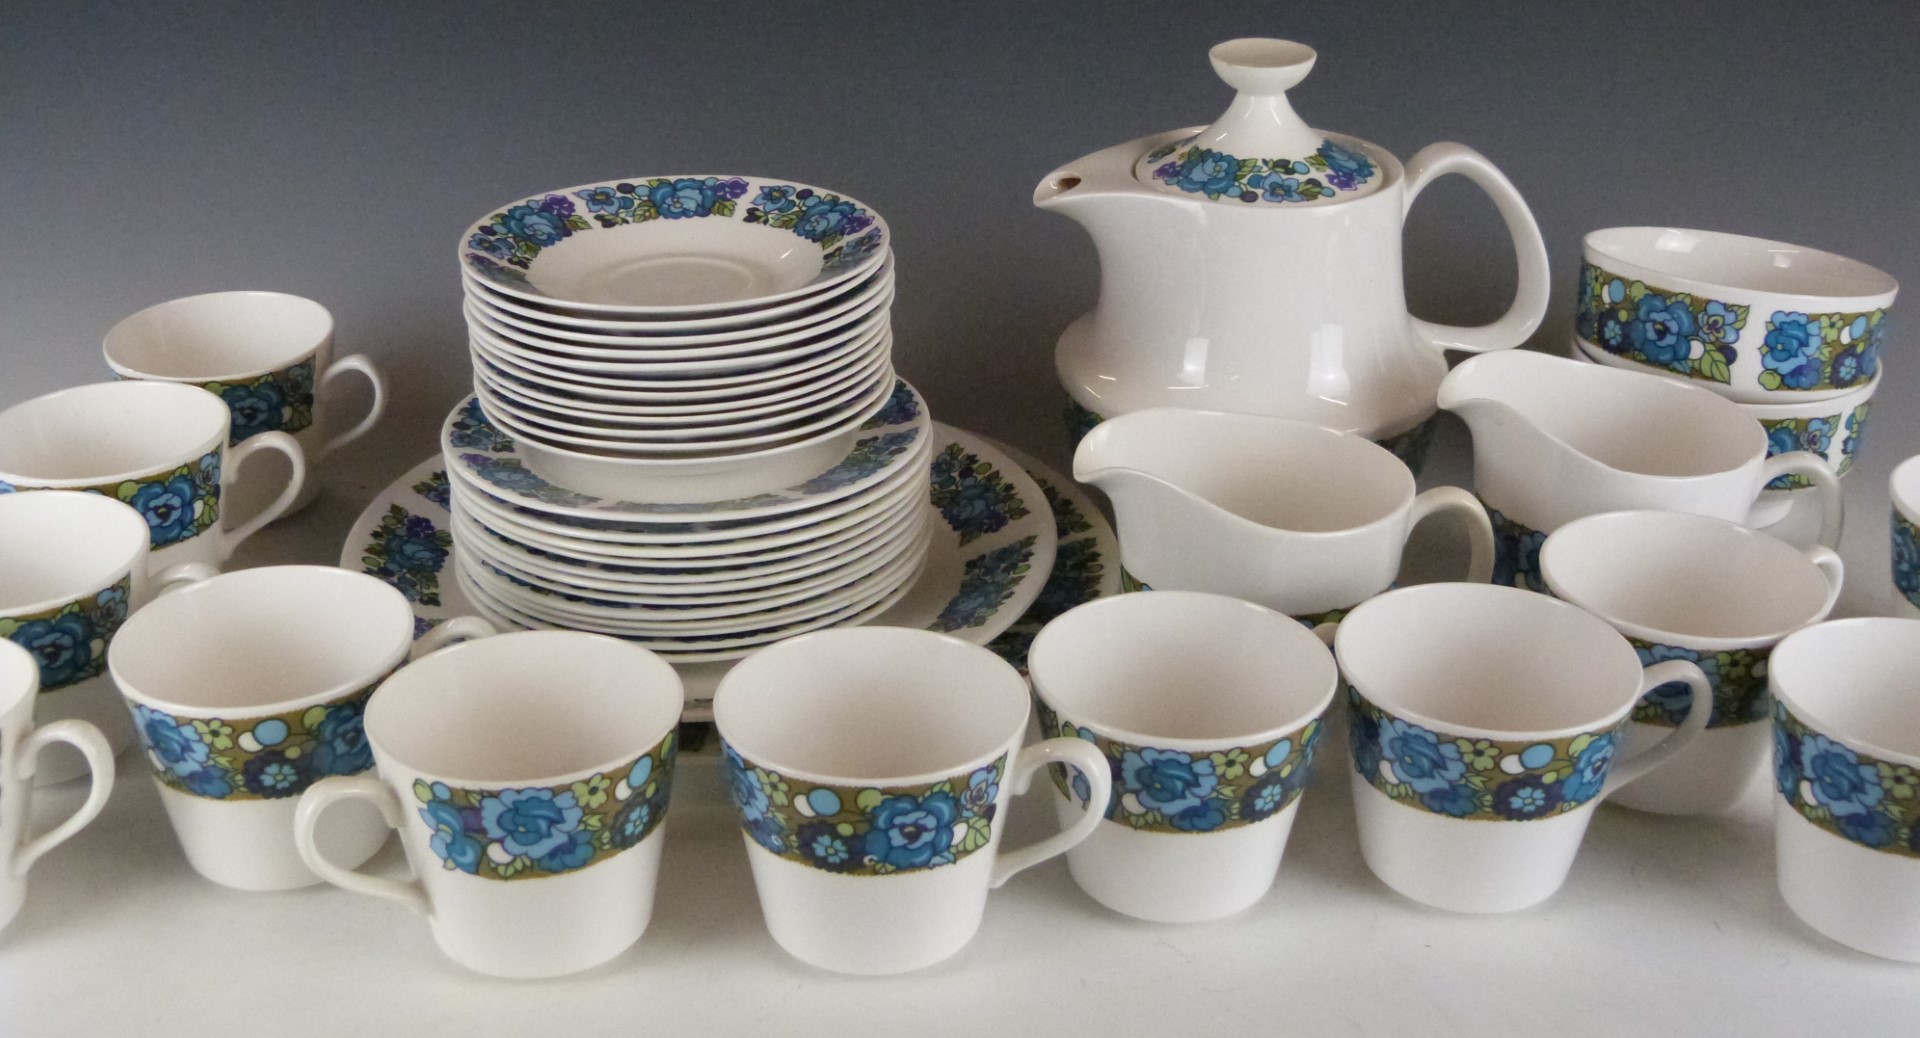 Ridgway retro /mid century modern 12 place setting tea service decorated in the Amanda pattern - Image 2 of 2